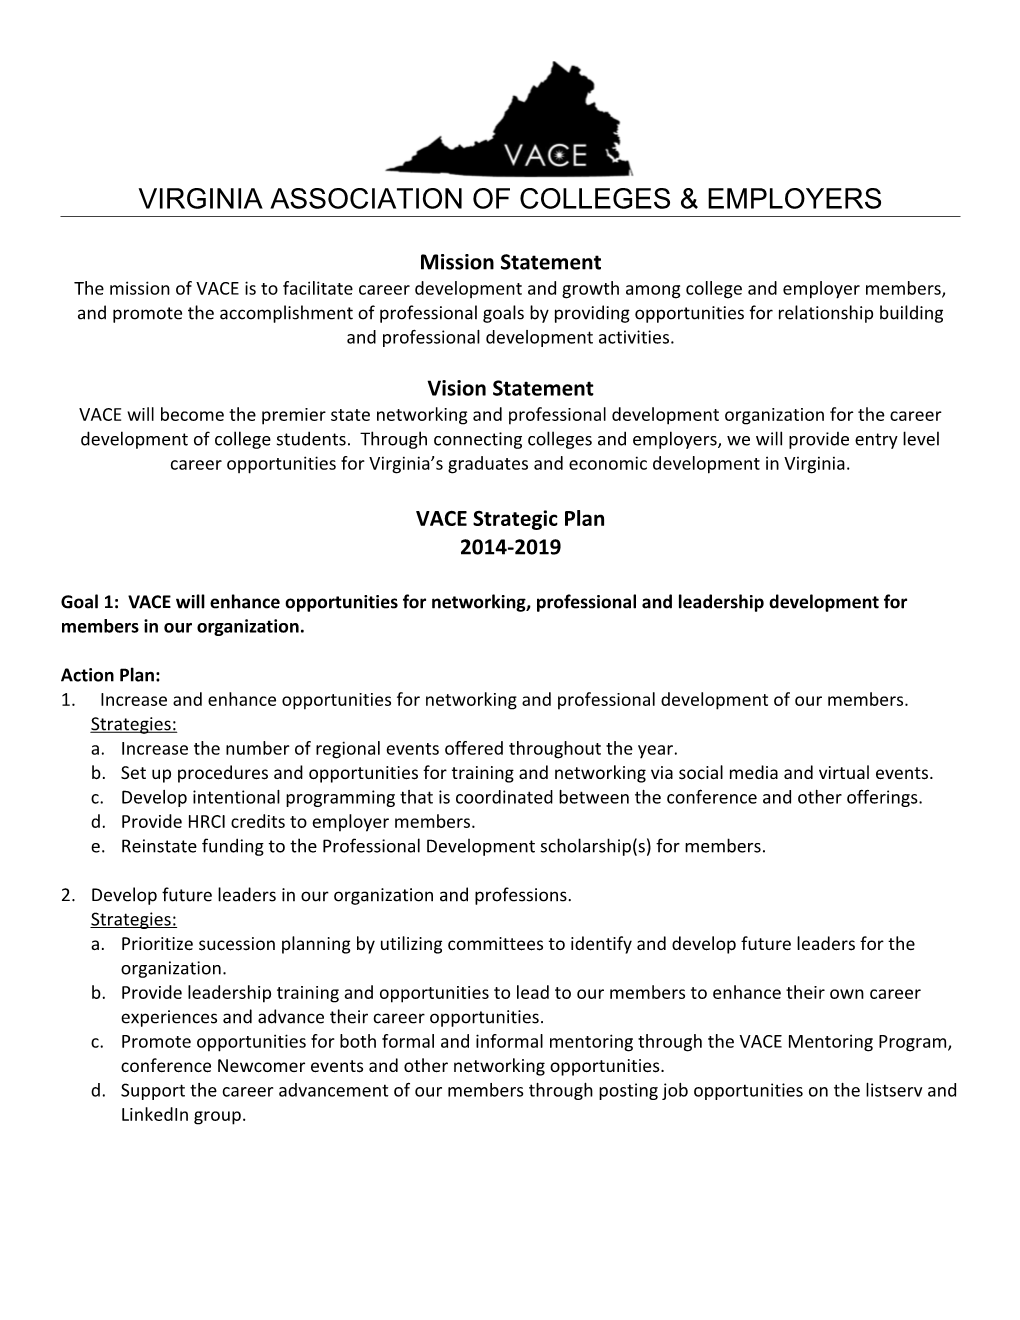 Virginia Association of Colleges & Employers